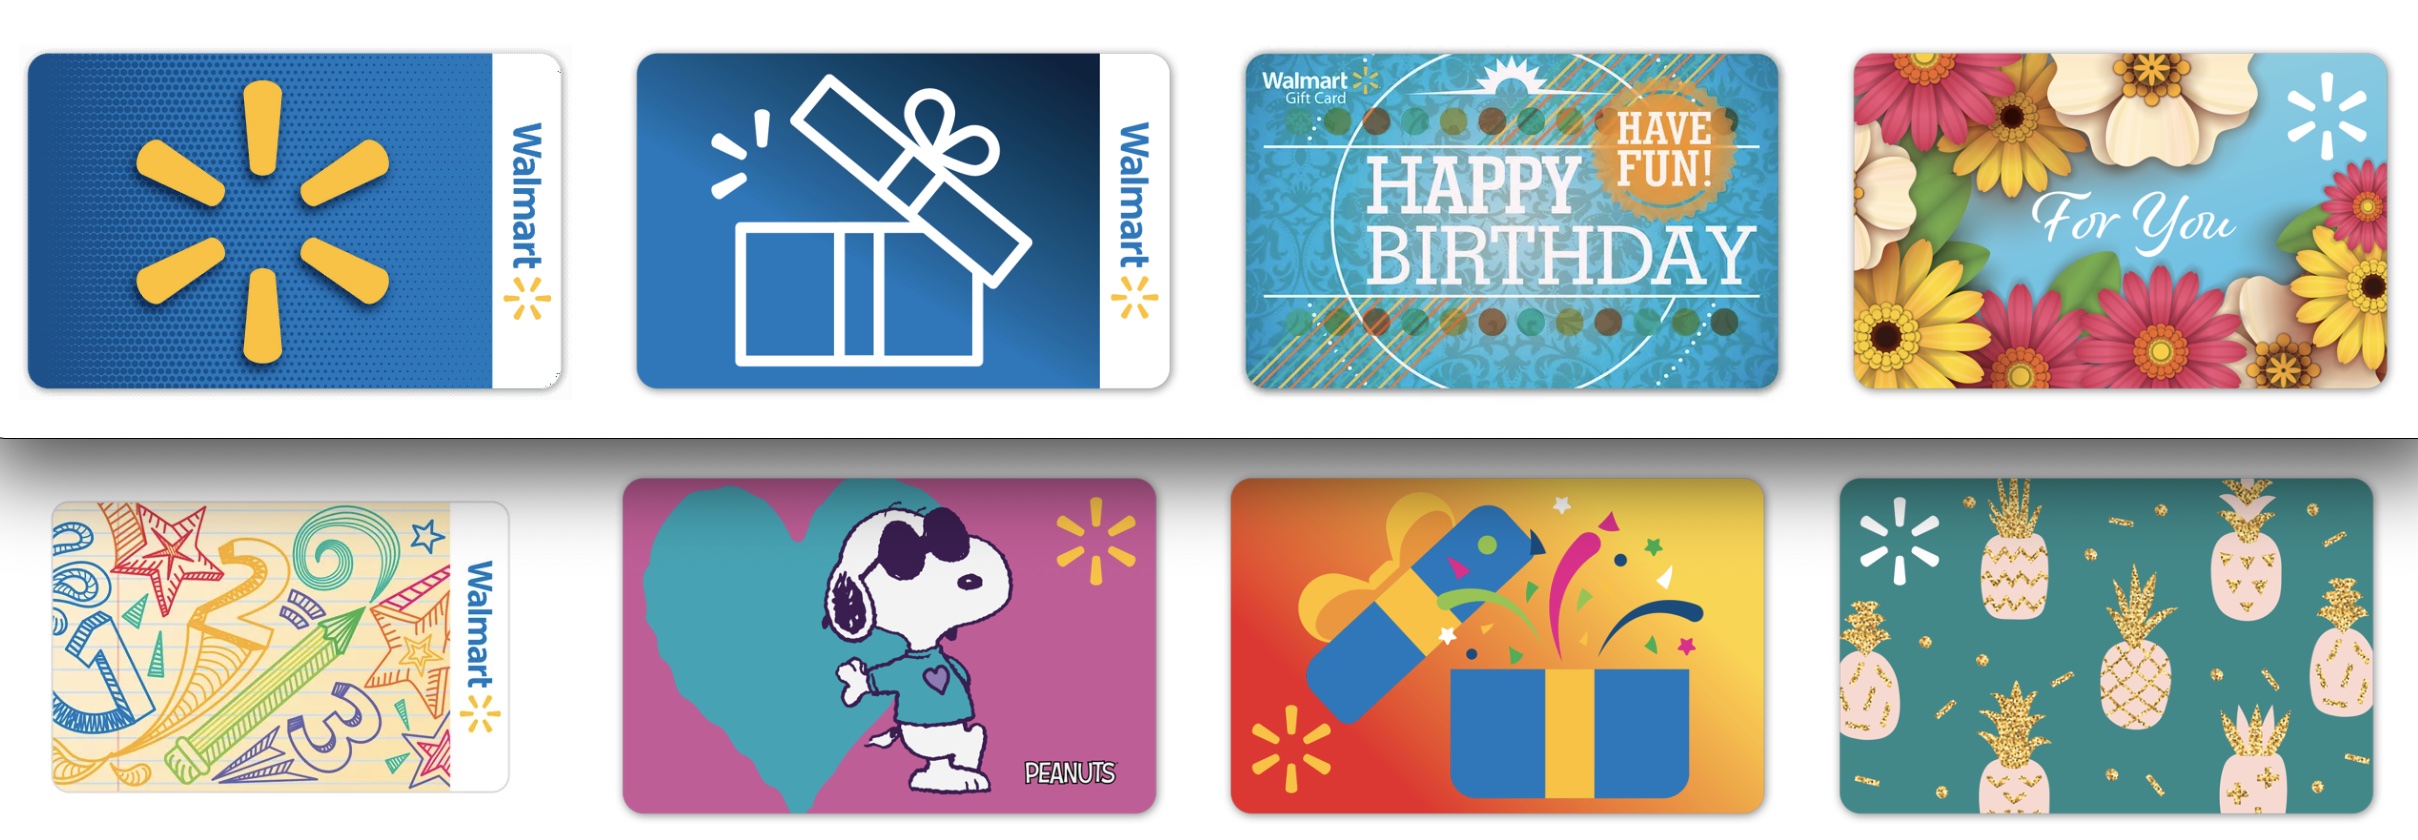 Can I Buy Gift Cards With Walmart Gift Cards?